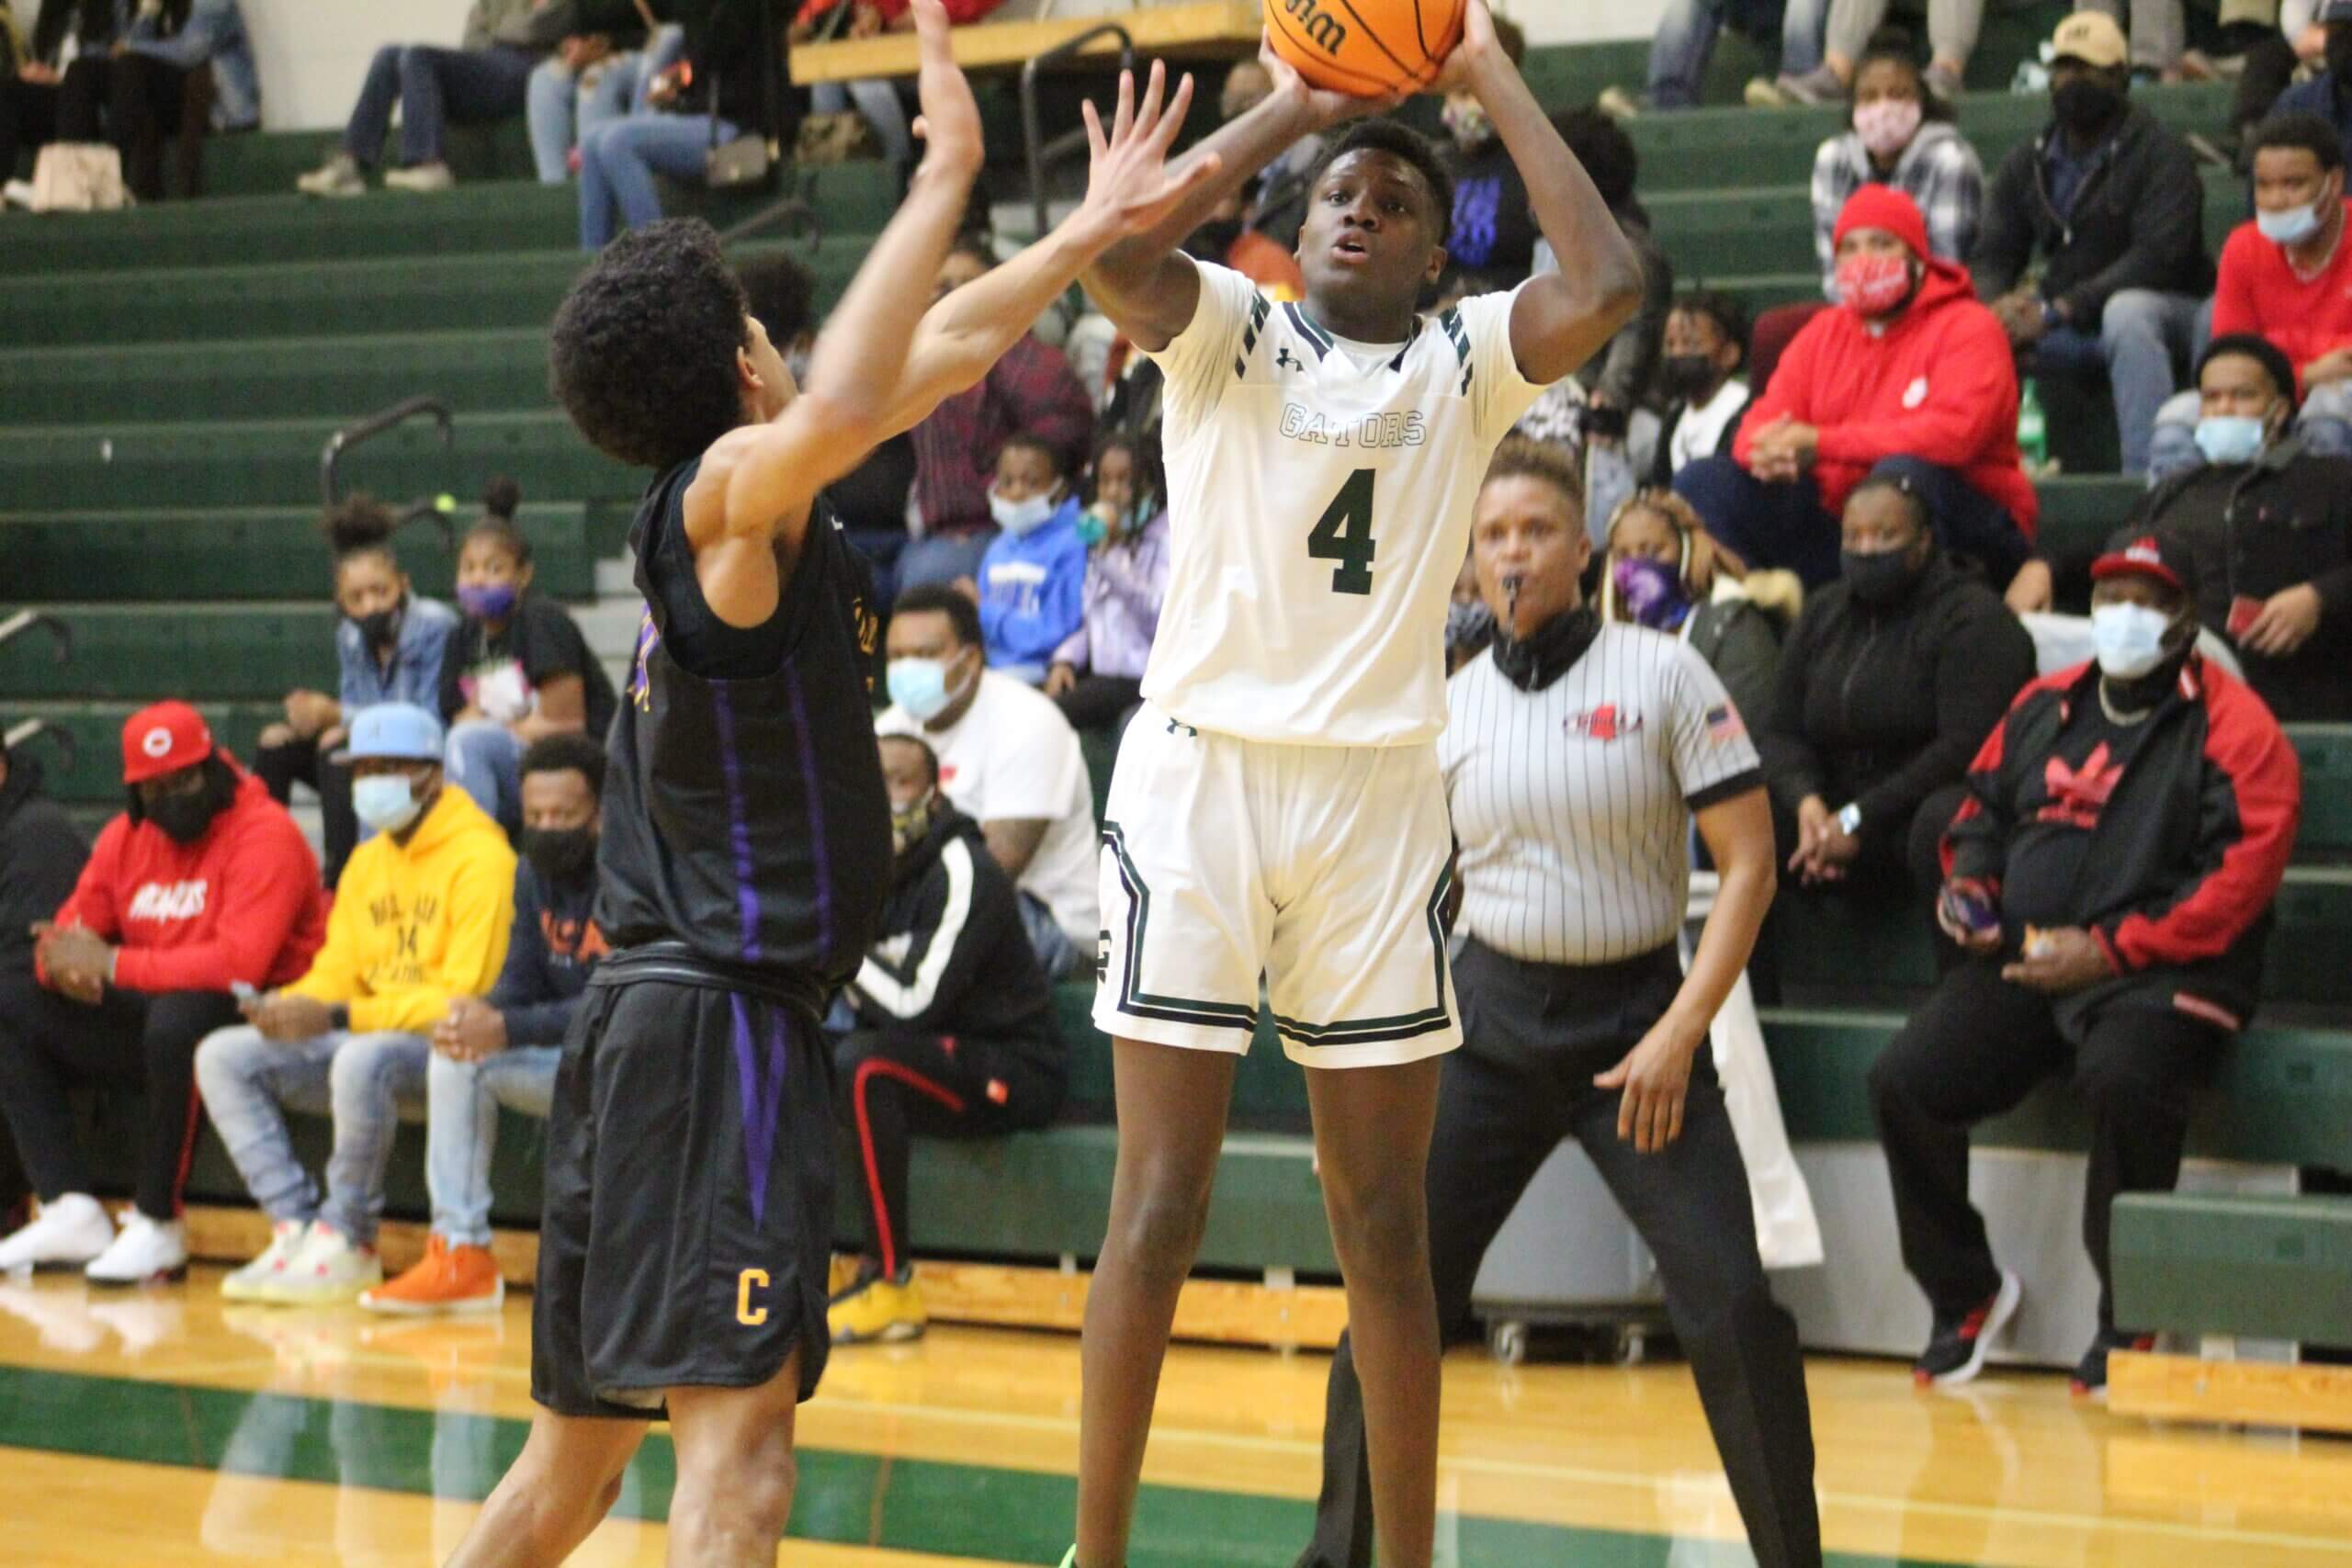 Tournament update: Gators chomp past Falcons in 5A boys basketball